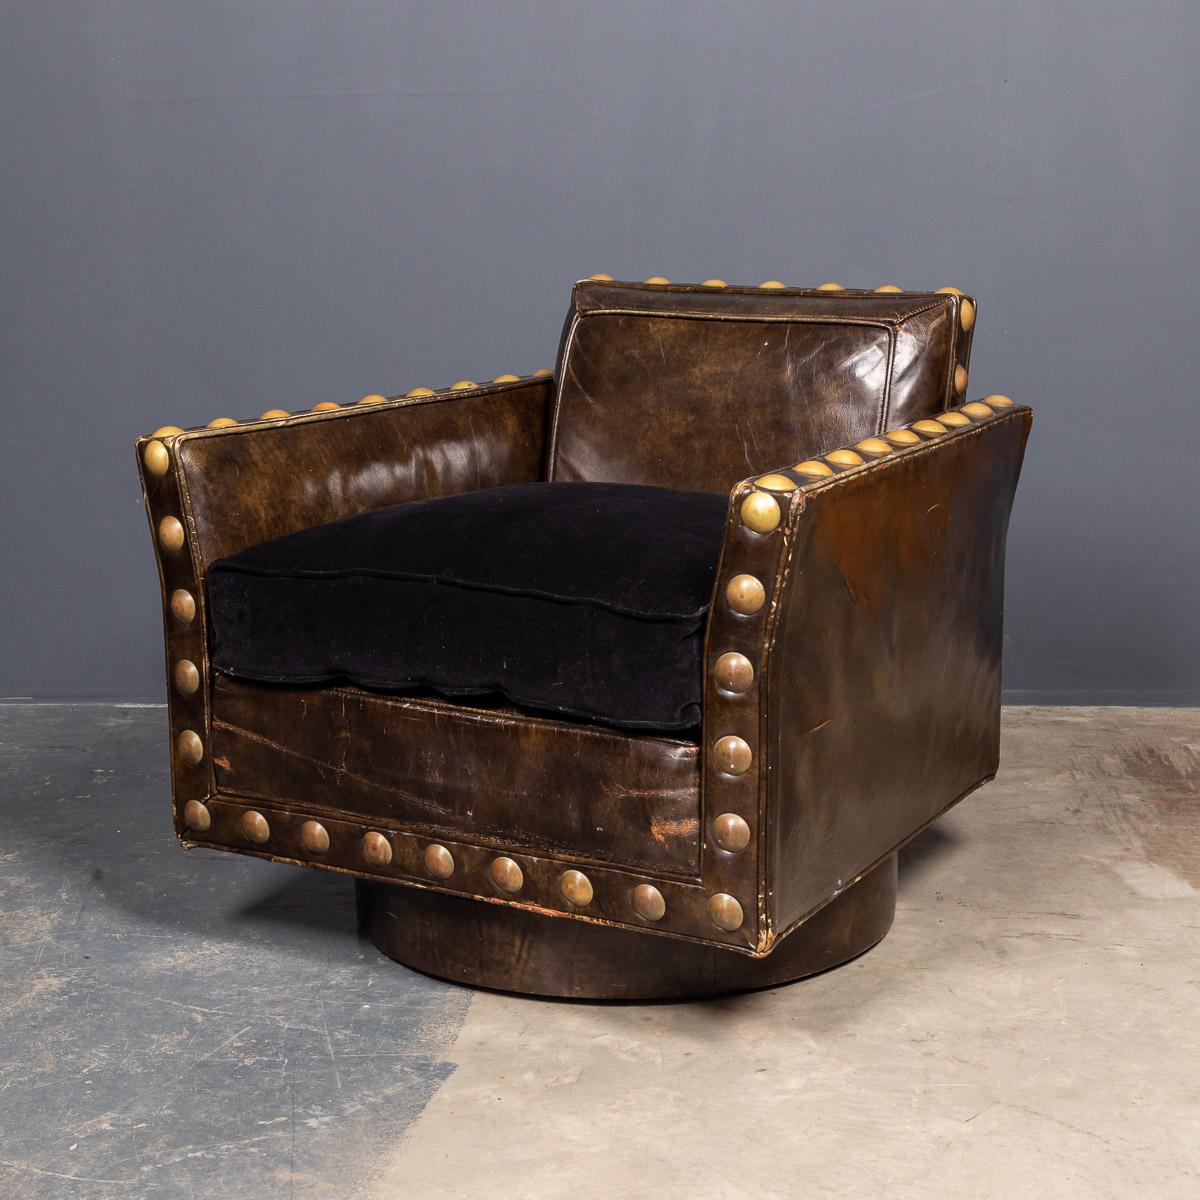 Stylish revolving club chair with its original leather upholstery with stunning over sized brass studs The seat cushion has been reupholstered in black velvet. Made by Baker, an American company that has been making fine furniture since 1890's.